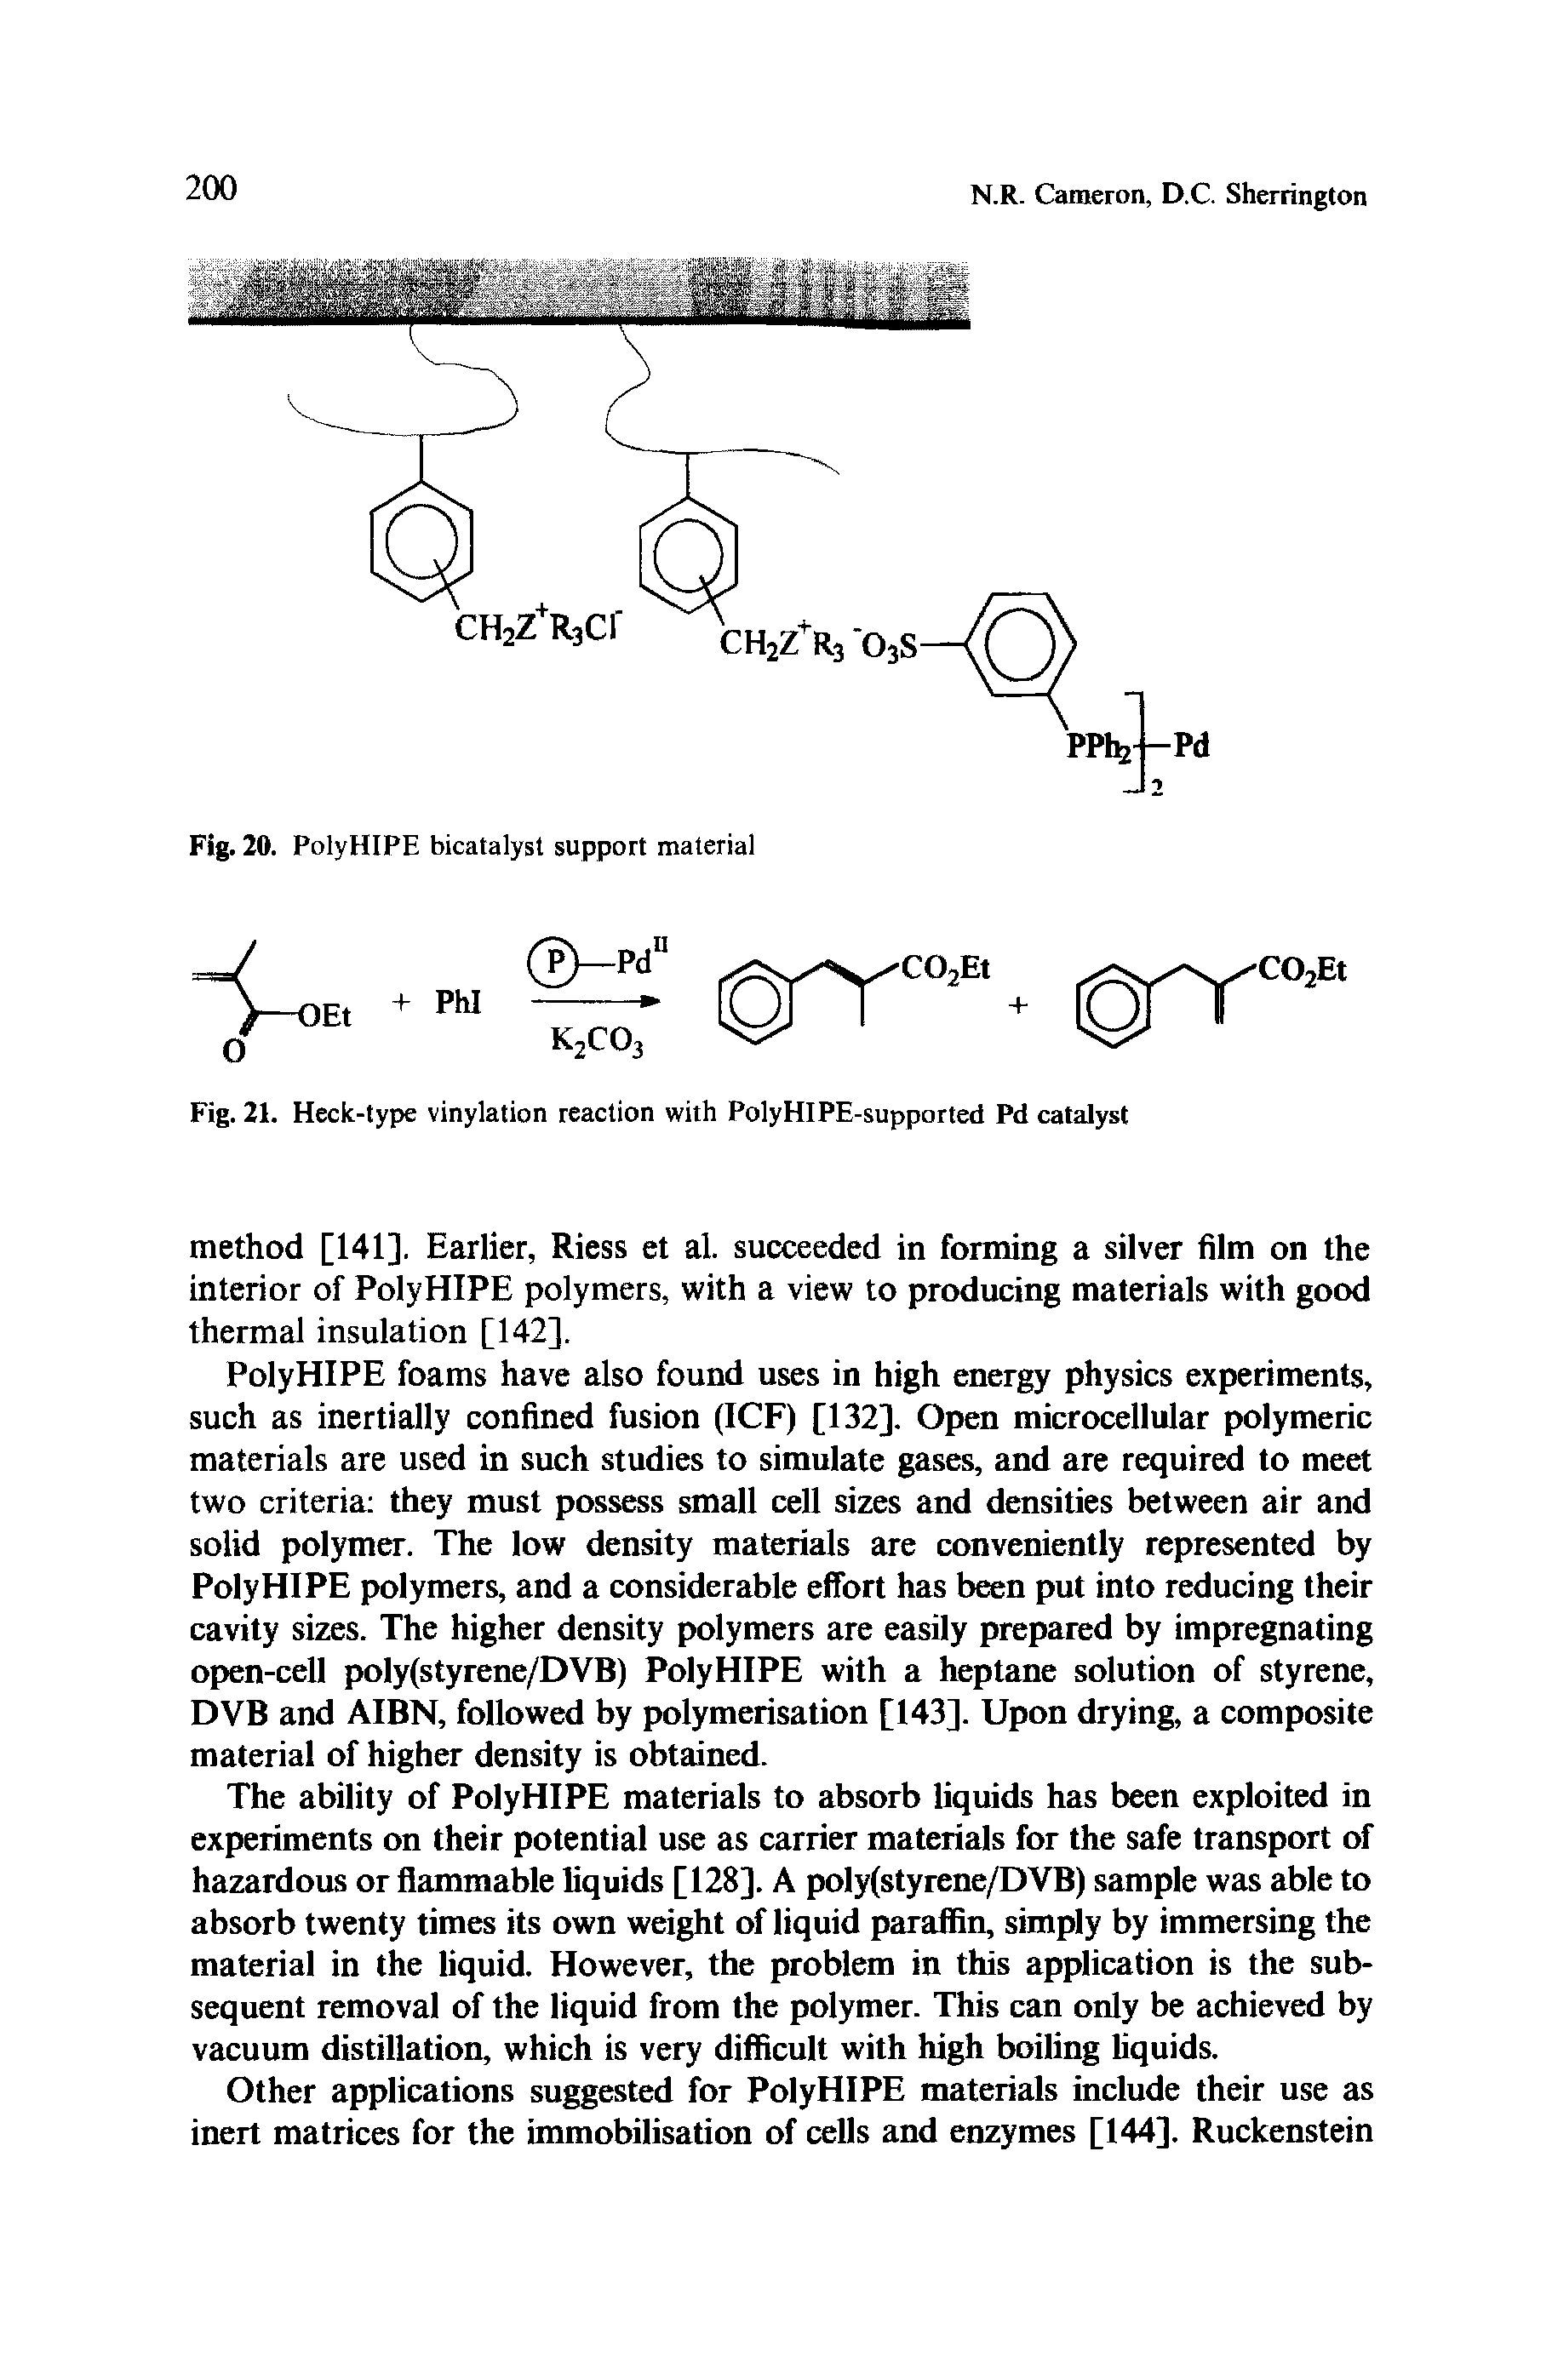 Fig. 21. Heck-type vinylation reaction with PolyHIPE-supported Pd catalyst...